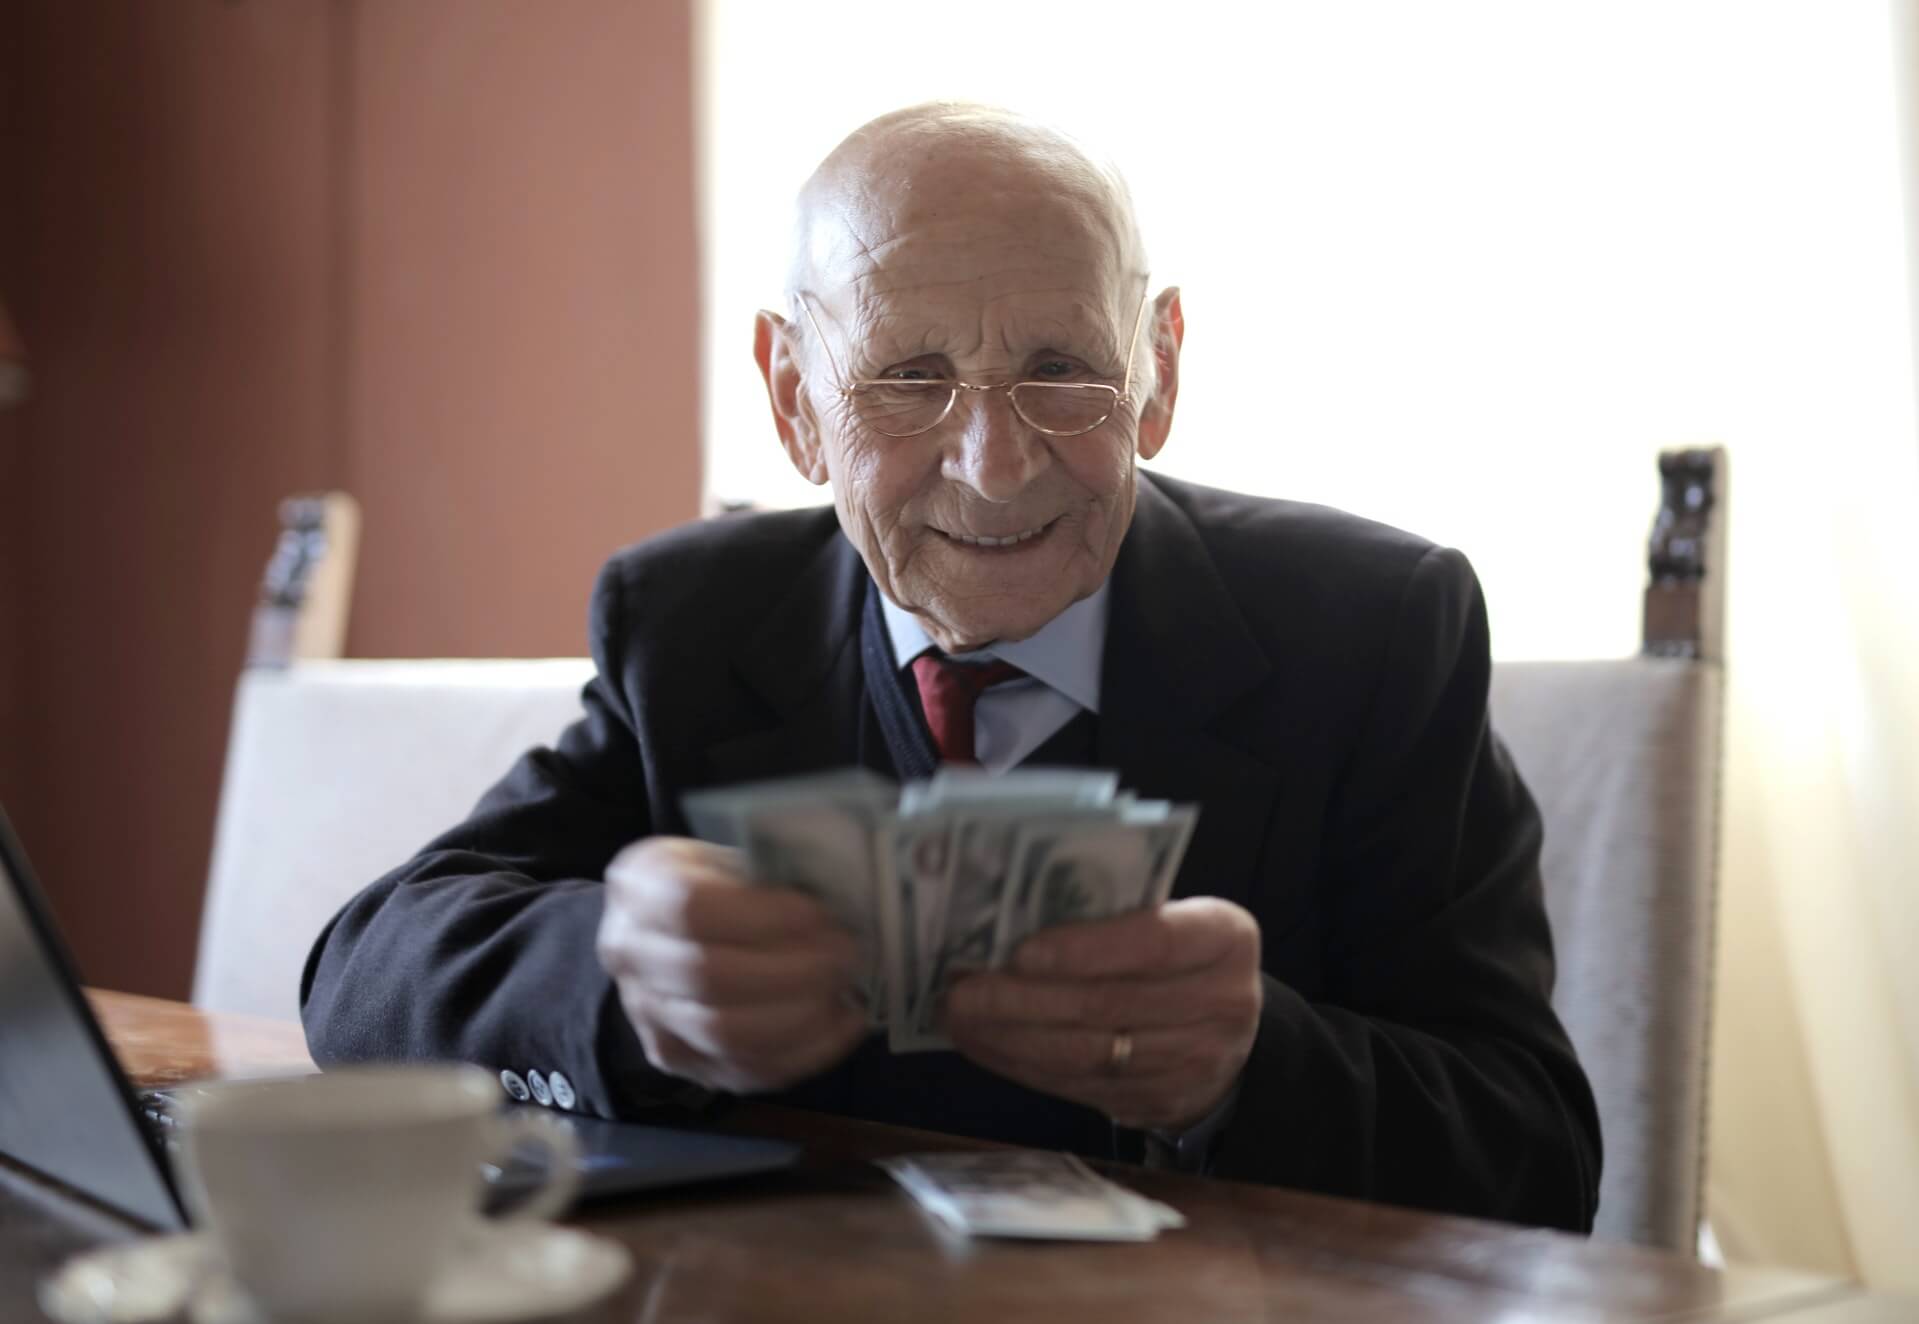 Older man in business suit looking at money